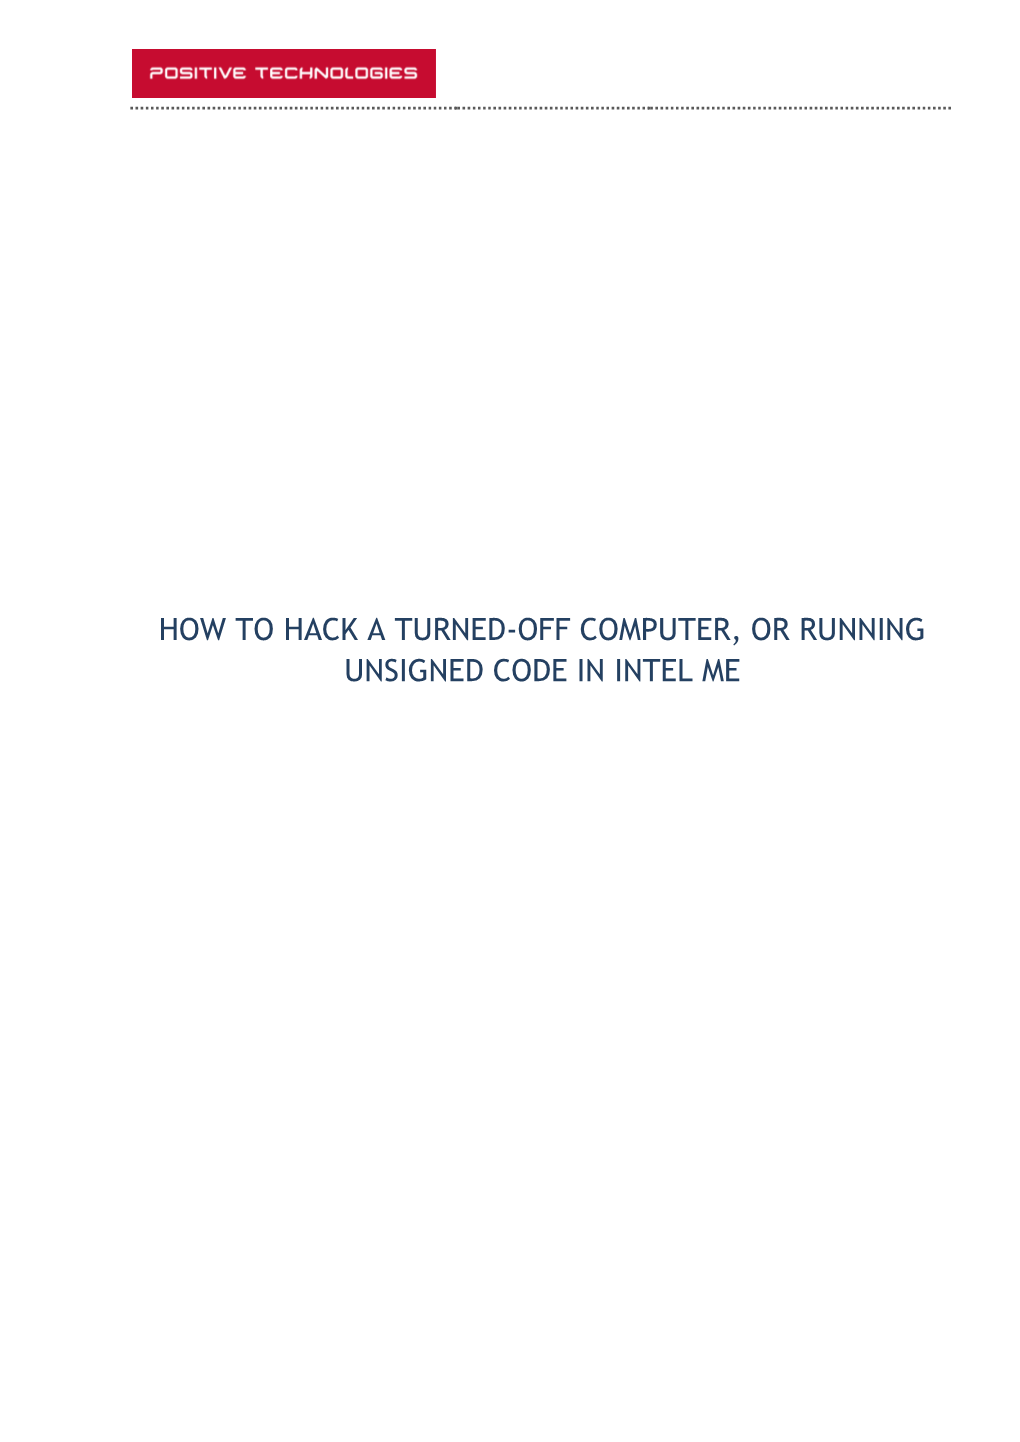 How to Hack a Turned-Off Computer Or Running Unsigned